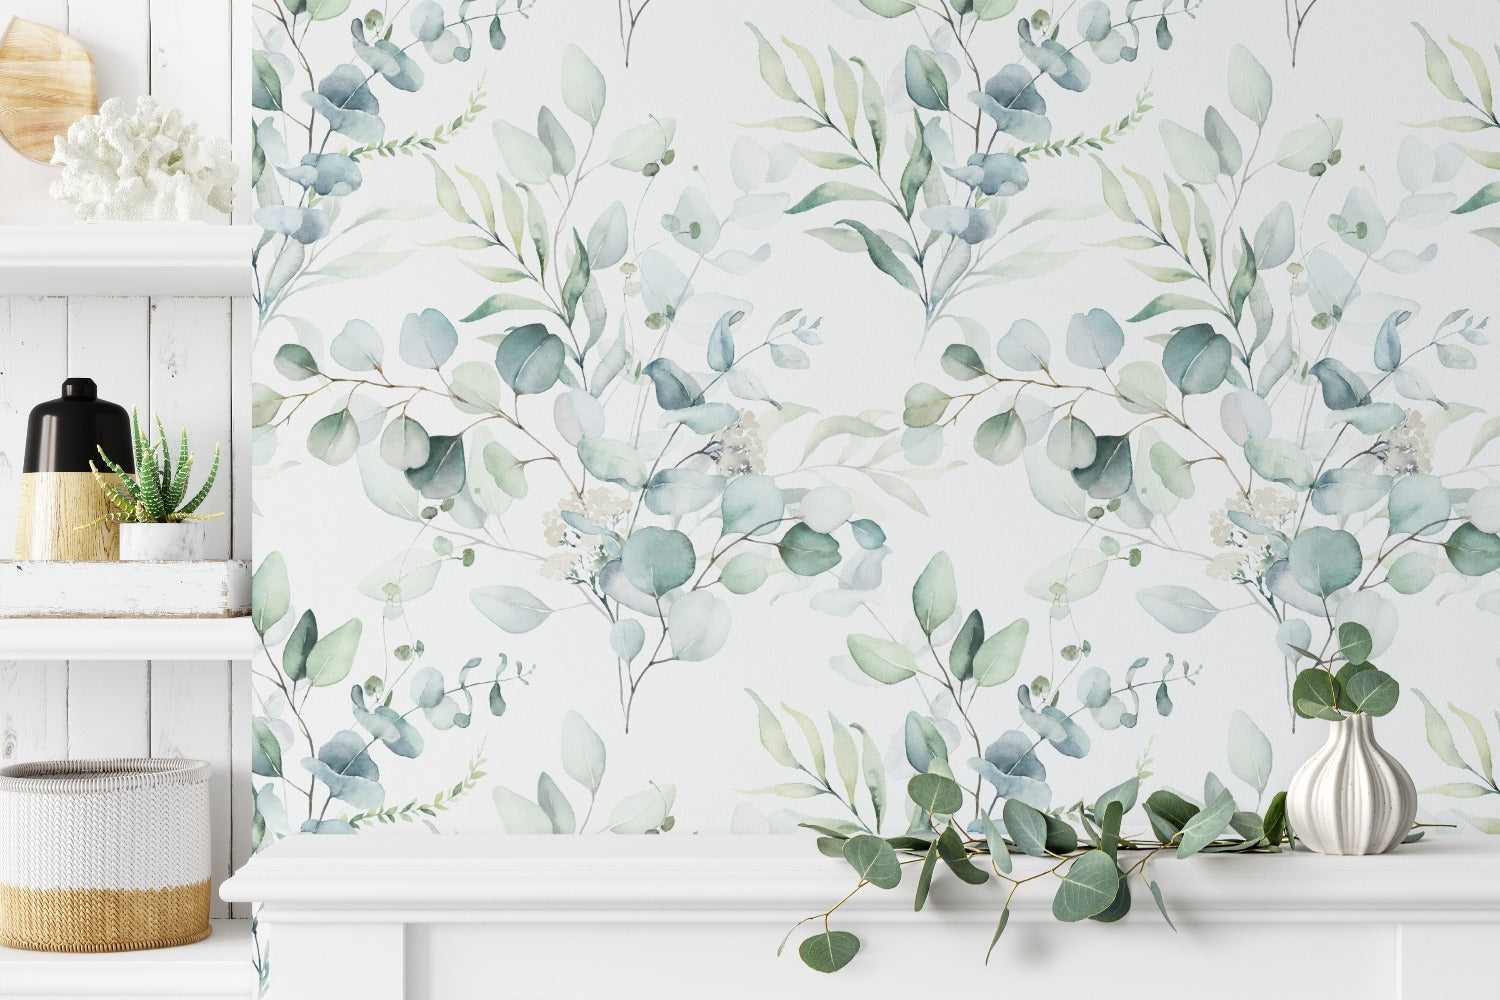 wallpaper, peel and stick wallpaper, Home decor, Green leaves and branches wallpaper, living room wallpaper, multi color wallpaper, Floral Wallpaper, 